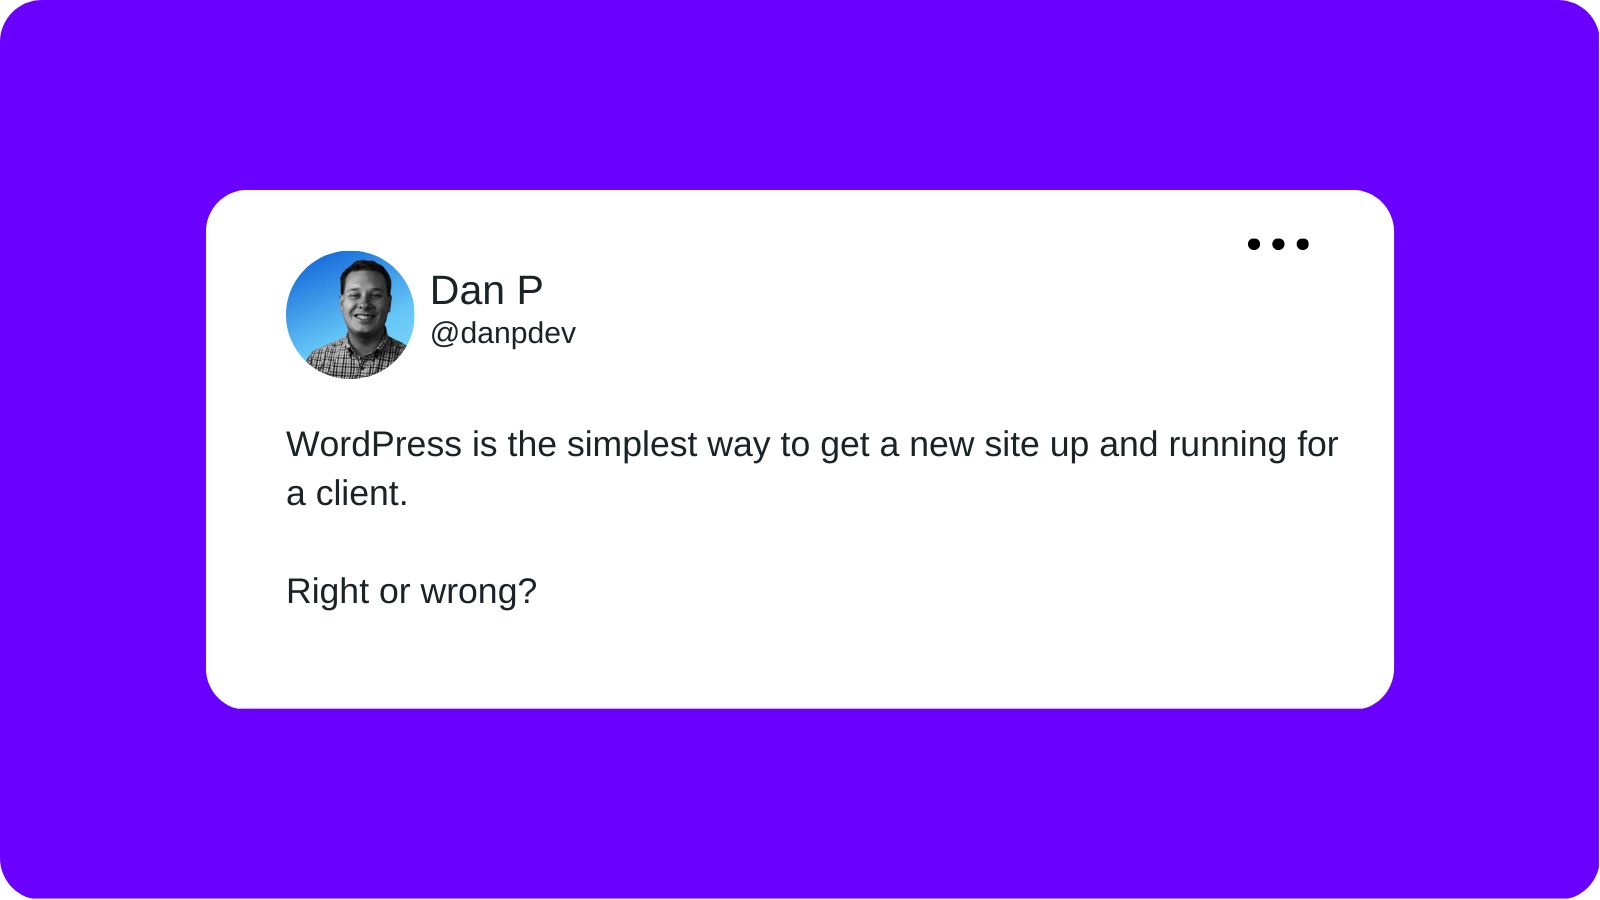 A tweet from Dan P layered over a purple background that reads "WordPress is the simplest way to get a new site up and running for a client. Right or wrong?"